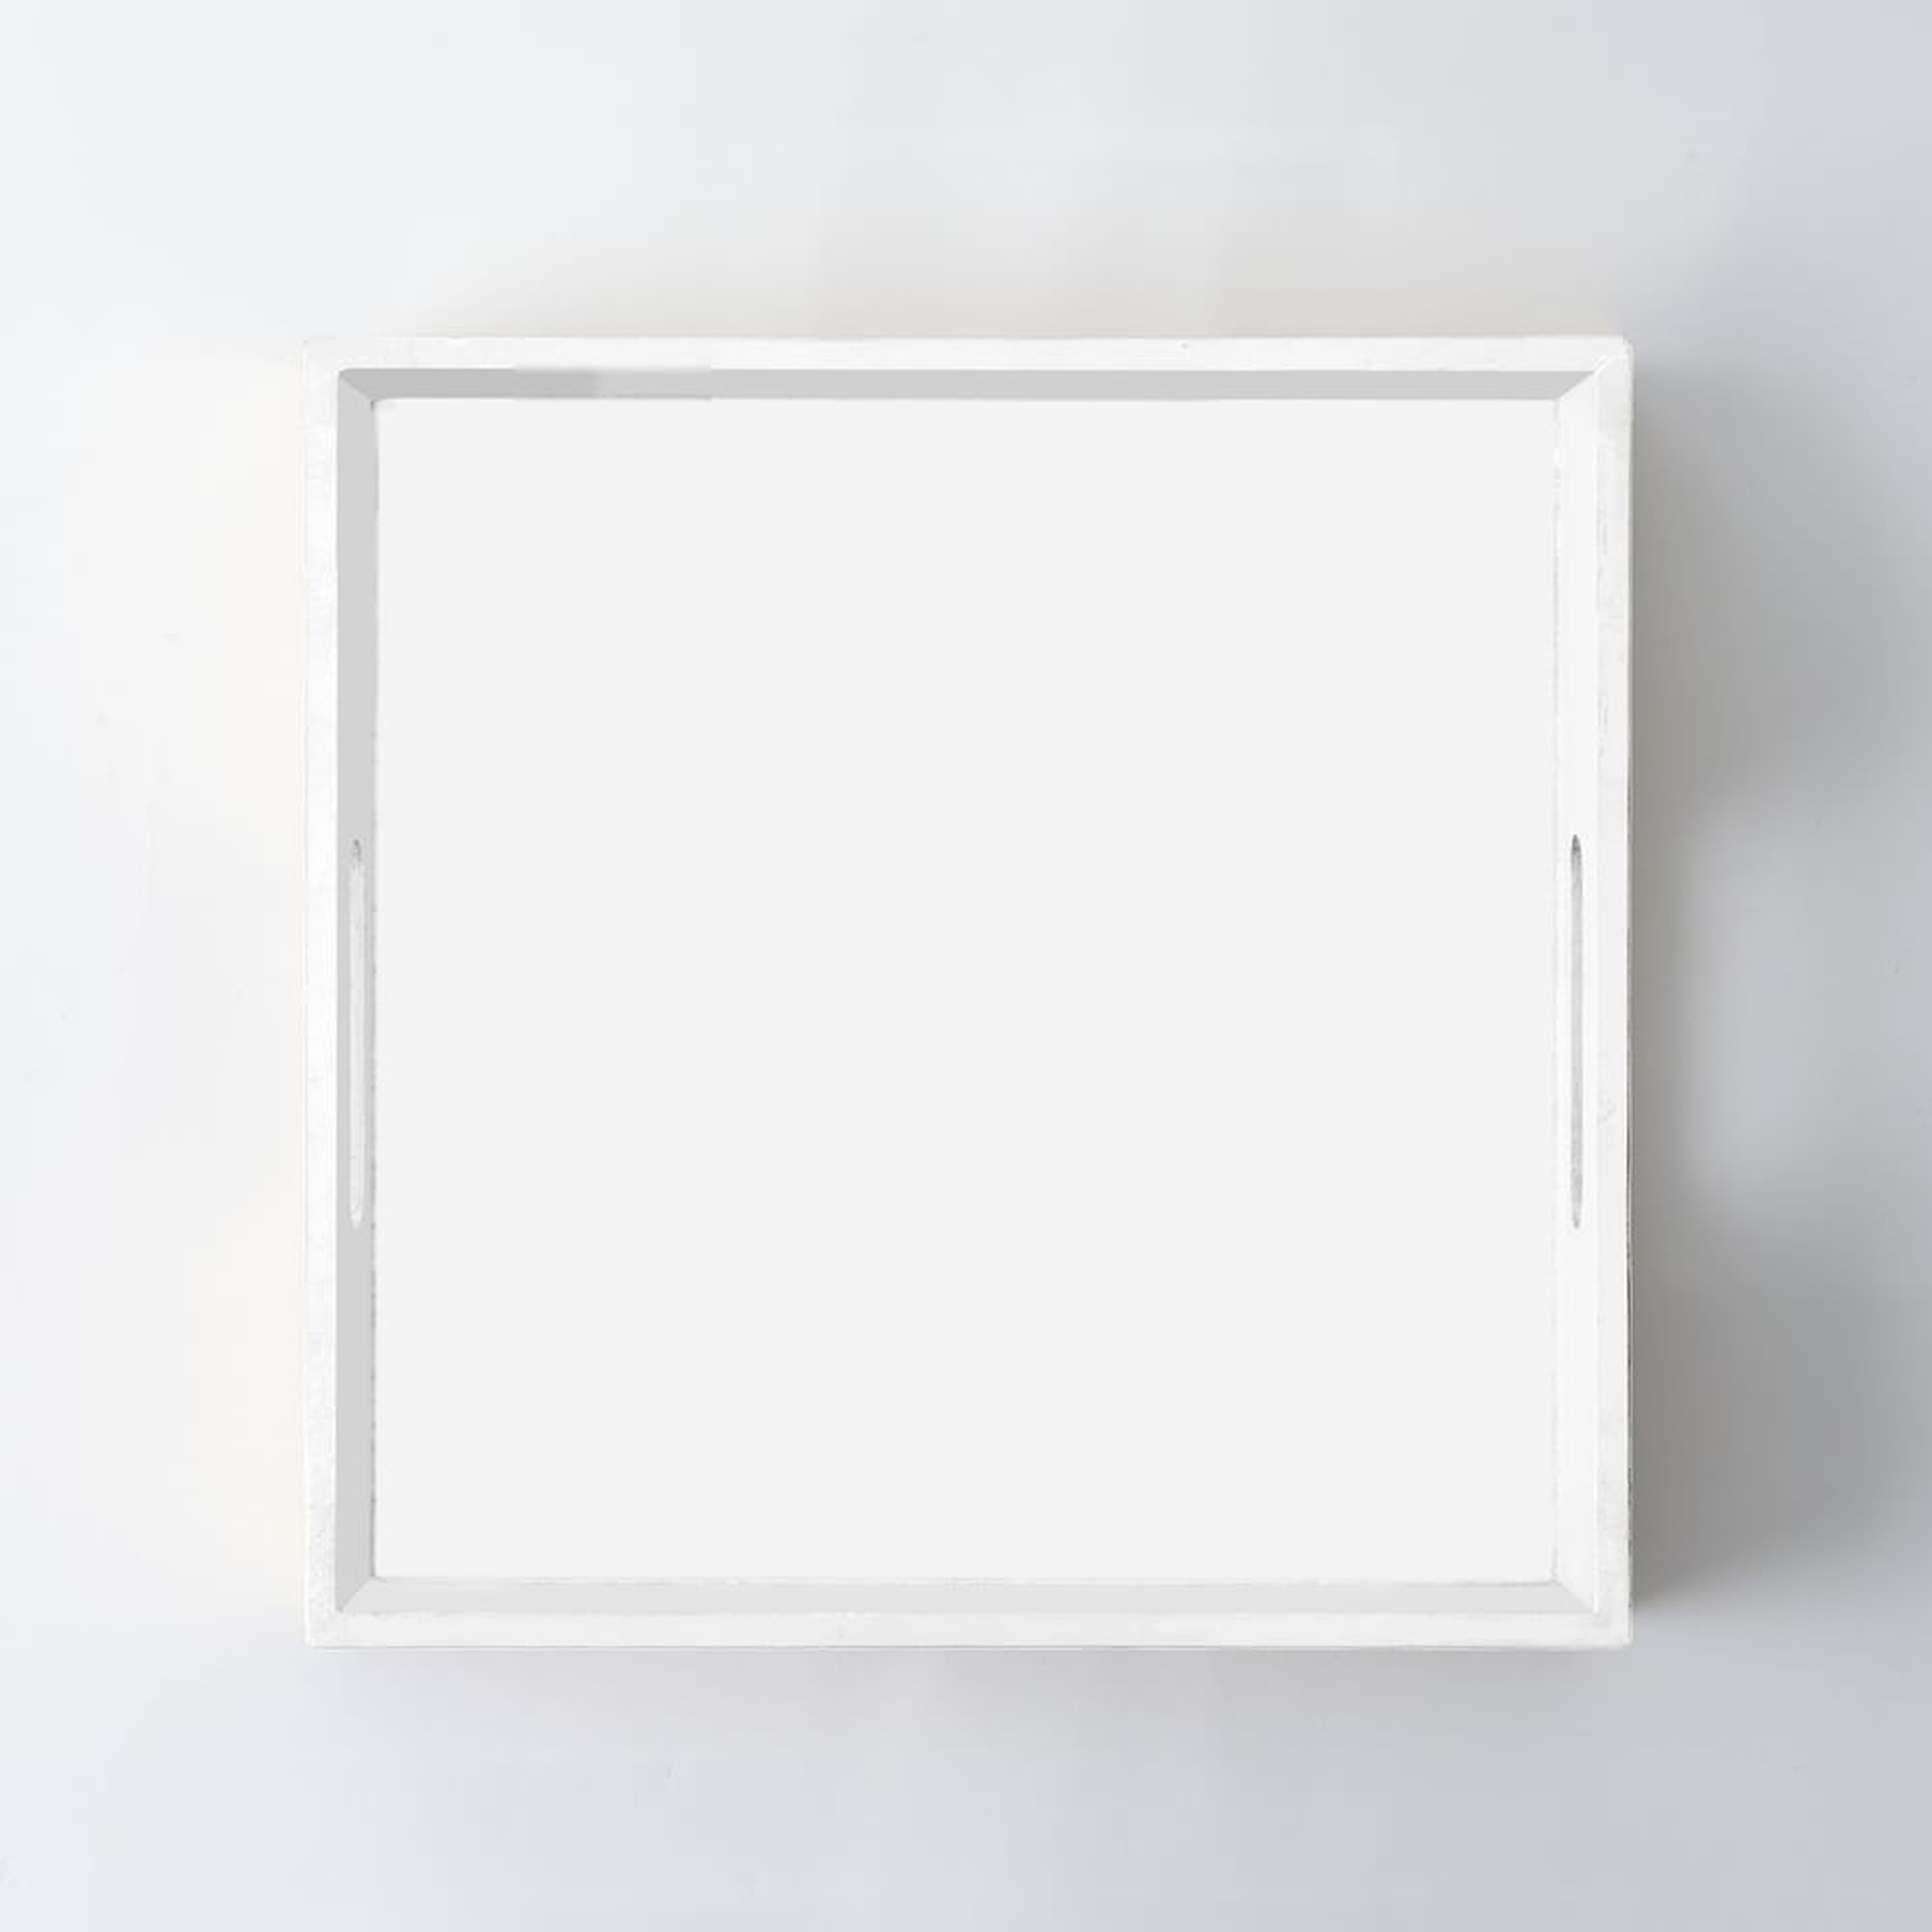 Lacquer Wood Square Tray 12"x 2.25", White - West Elm